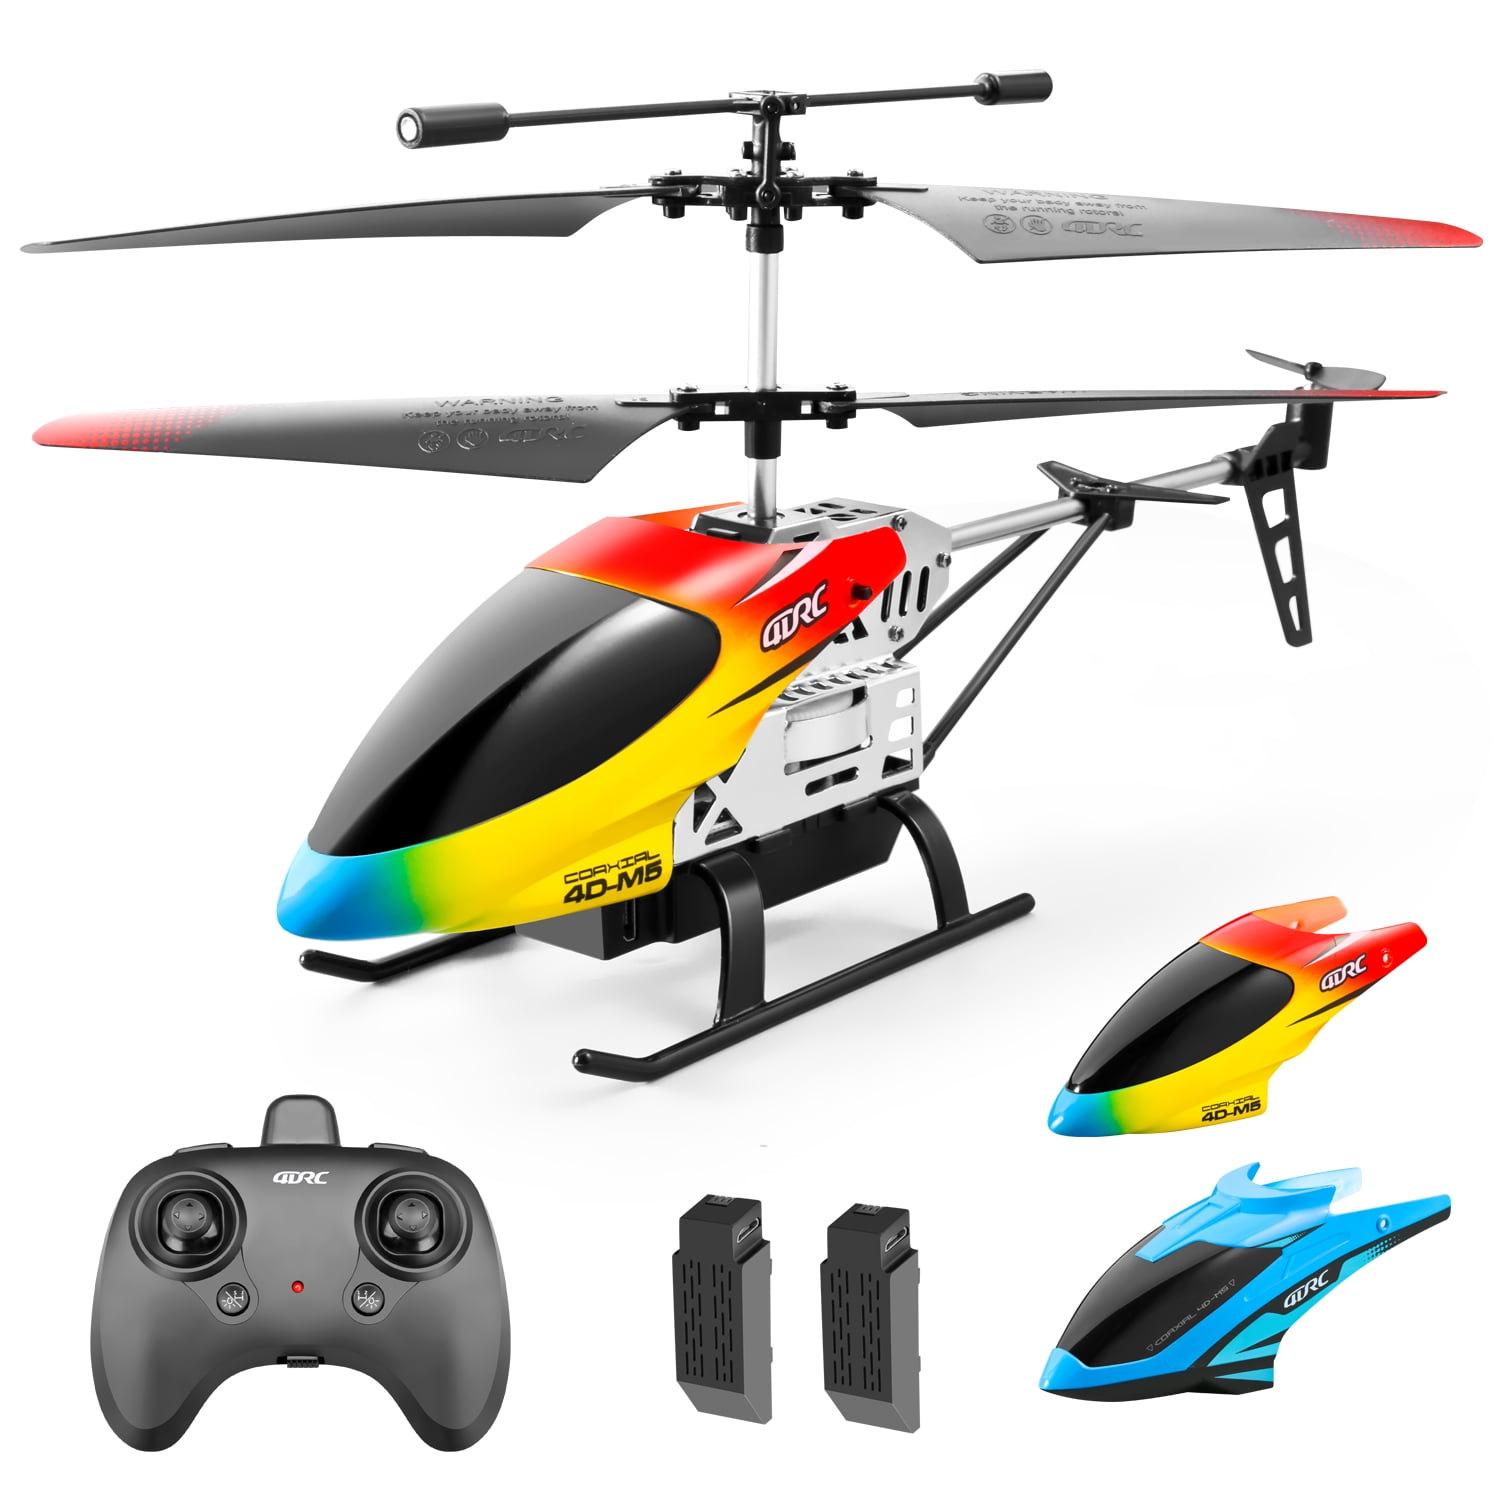 2.4Ghz 4.5CH RC Drone Aircraft Remote Control Plane Airplane Helicopter Toy HI 